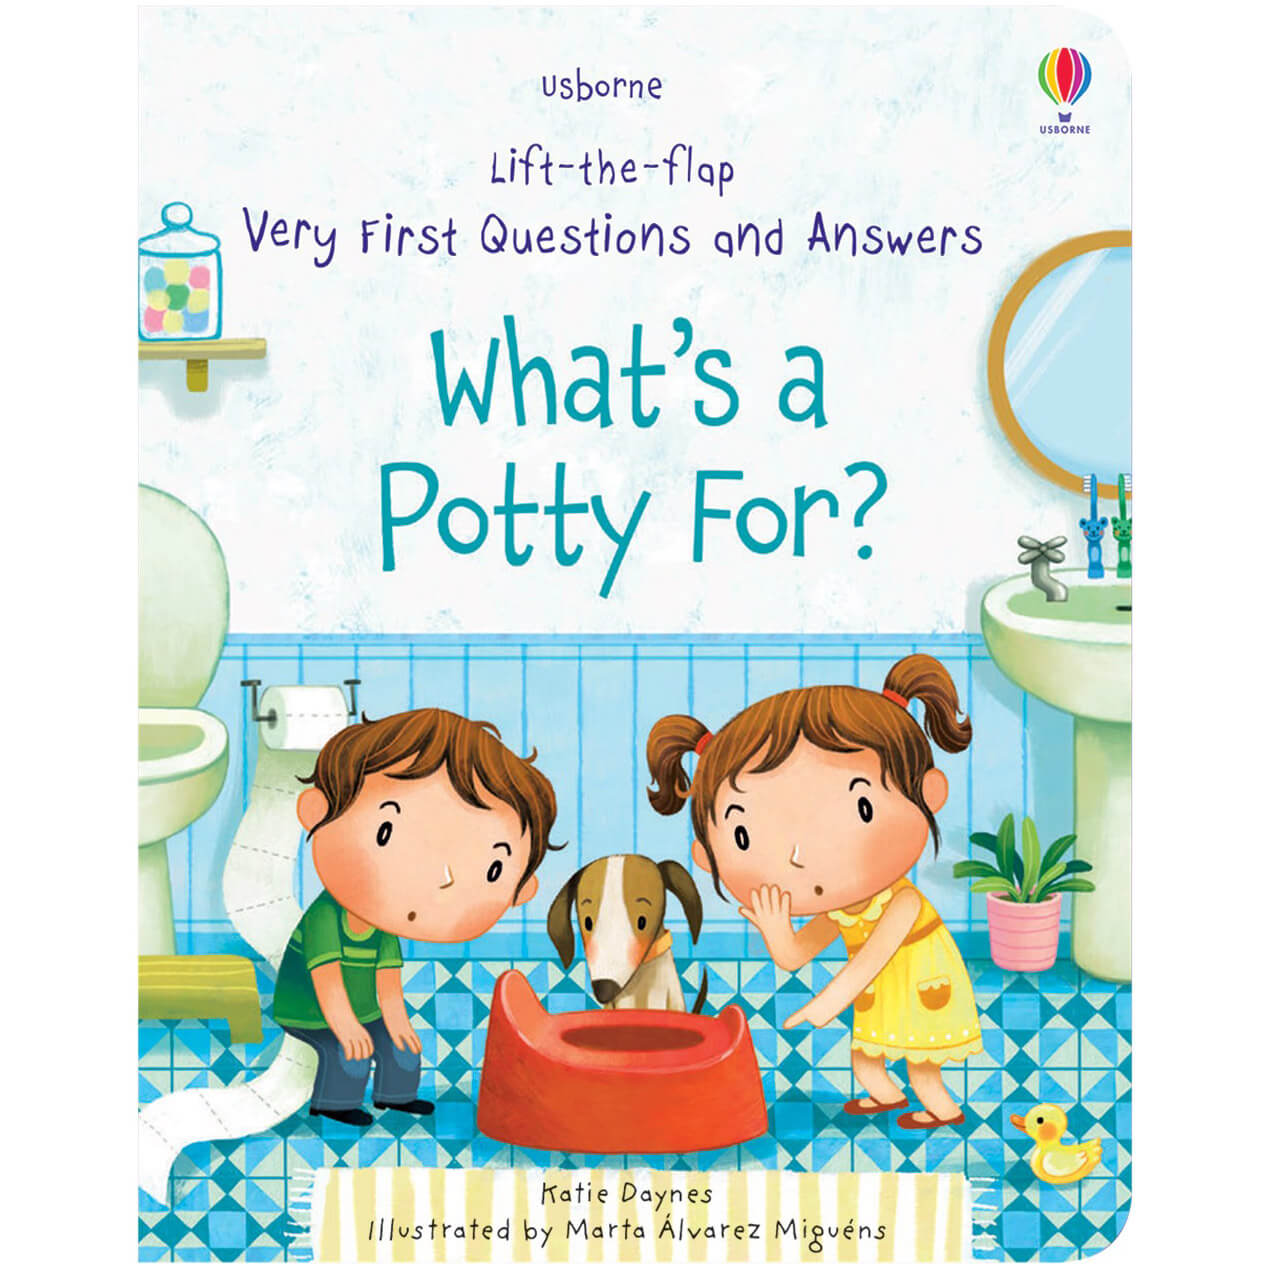 Usborne Lift-the-Flap Very First Questions: What’s a Potty For?